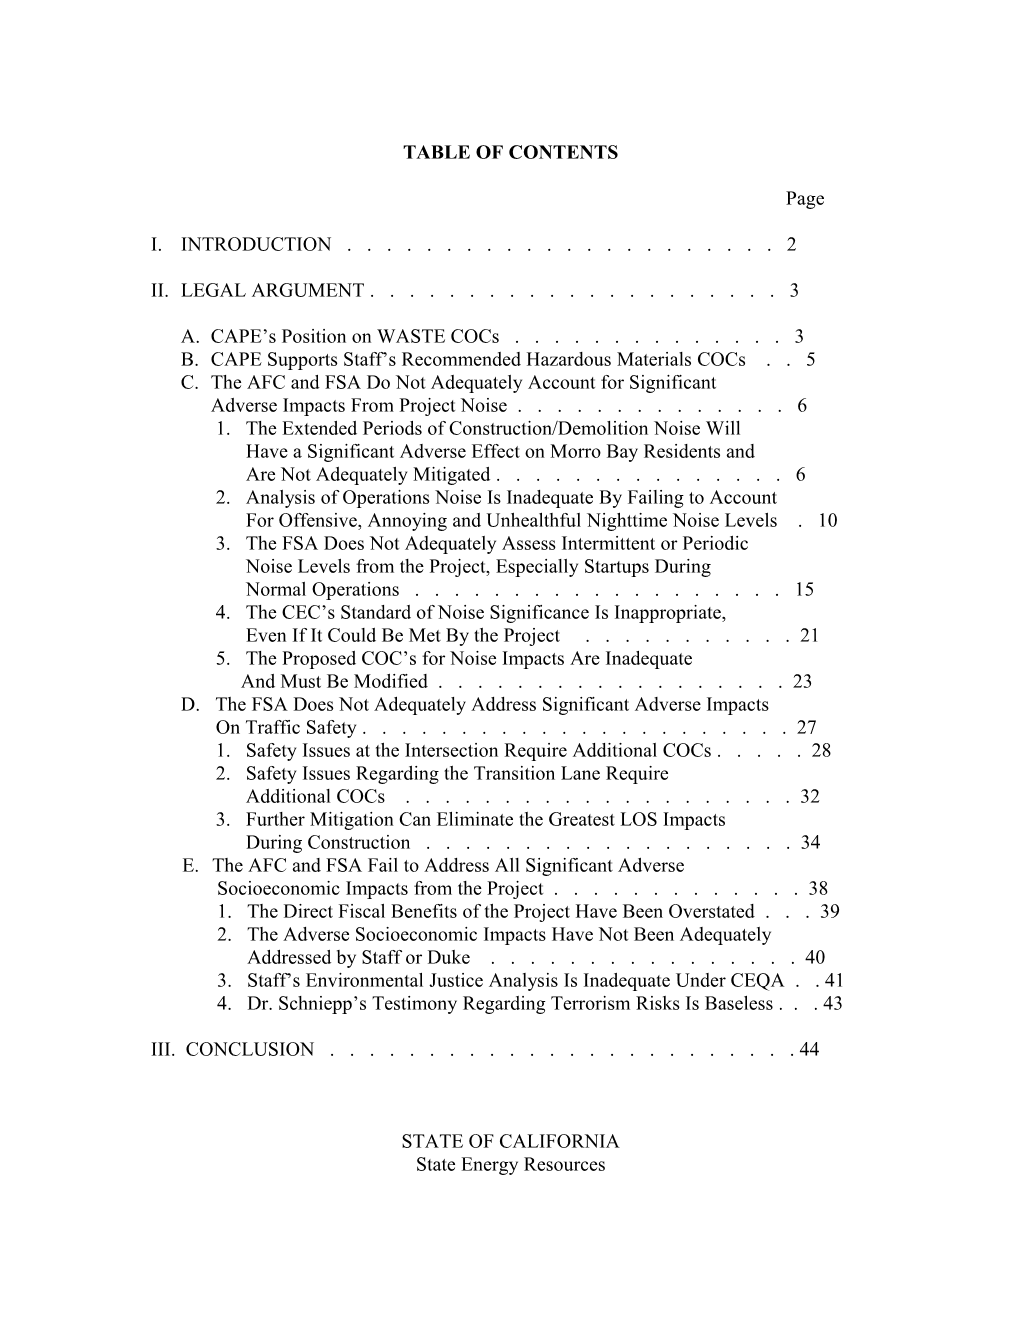 Table of Contents s276